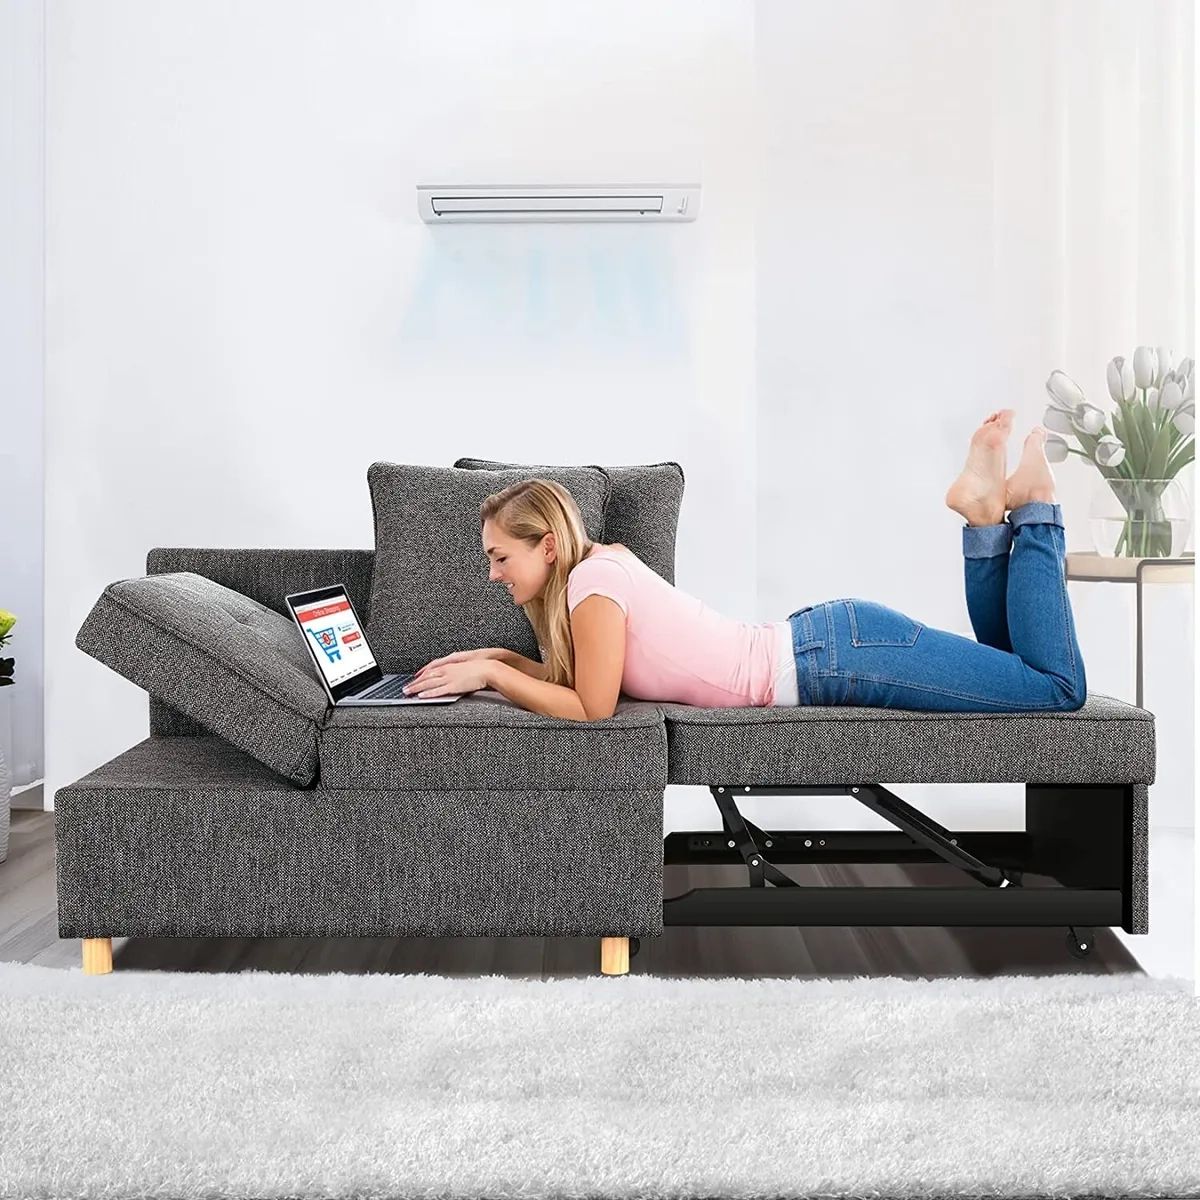 ⭐folding Ottoman Sofa Bed Convertible Chair 4 In 1 Multi Function Sleeper  Sofa~⭐ | Ebay For 4 In 1 Convertible Sleeper Chair Beds (View 9 of 15)